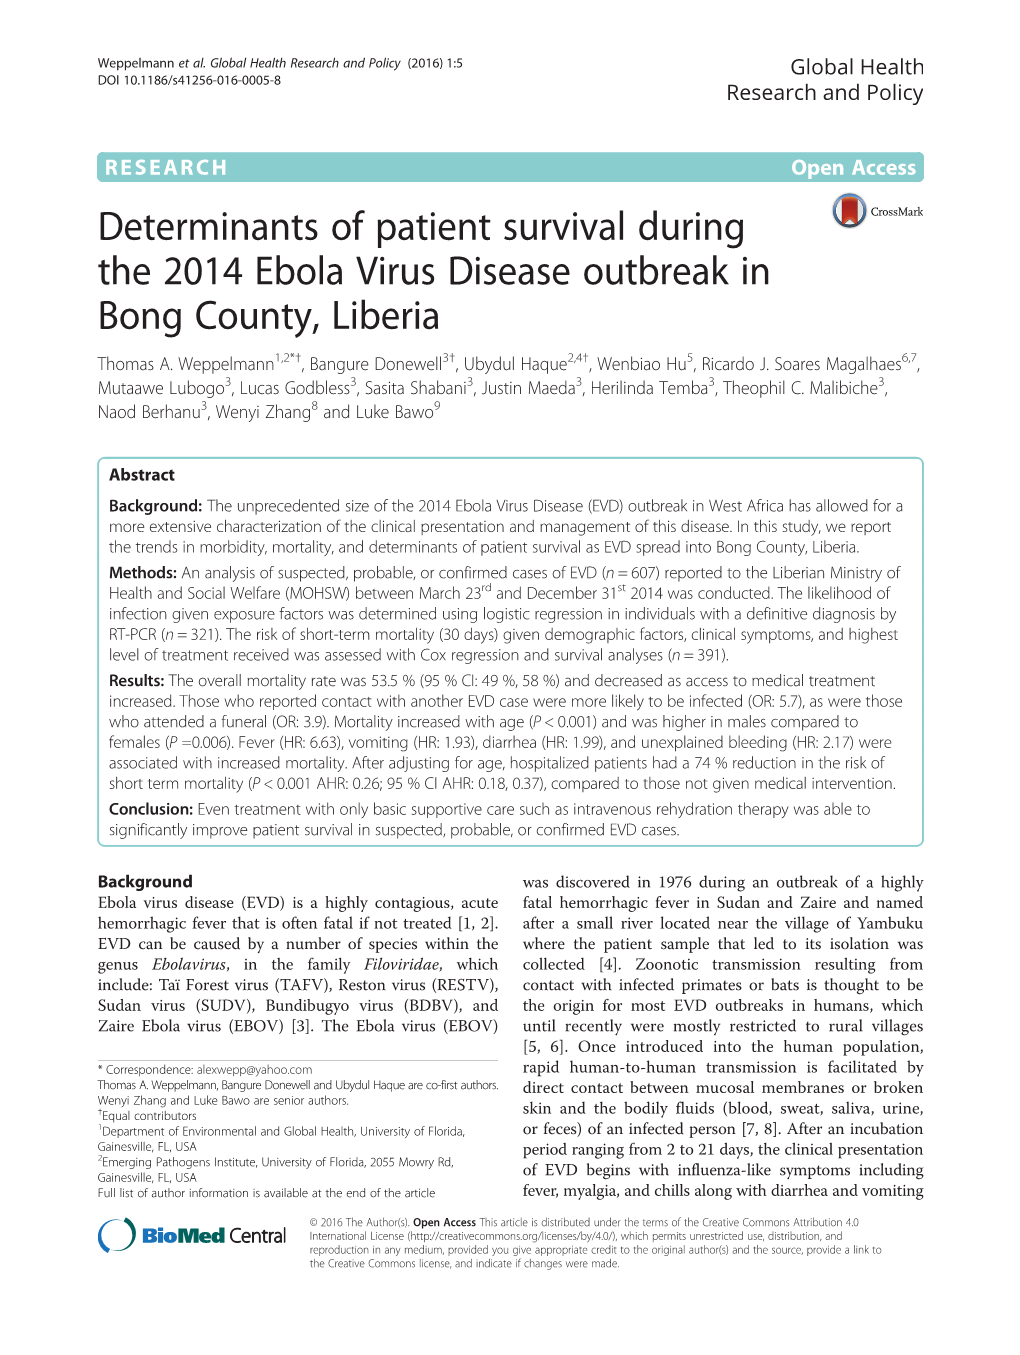 Determinants of Patient Survival During the 2014 Ebola Virus Disease Outbreak in Bong County, Liberia Thomas A